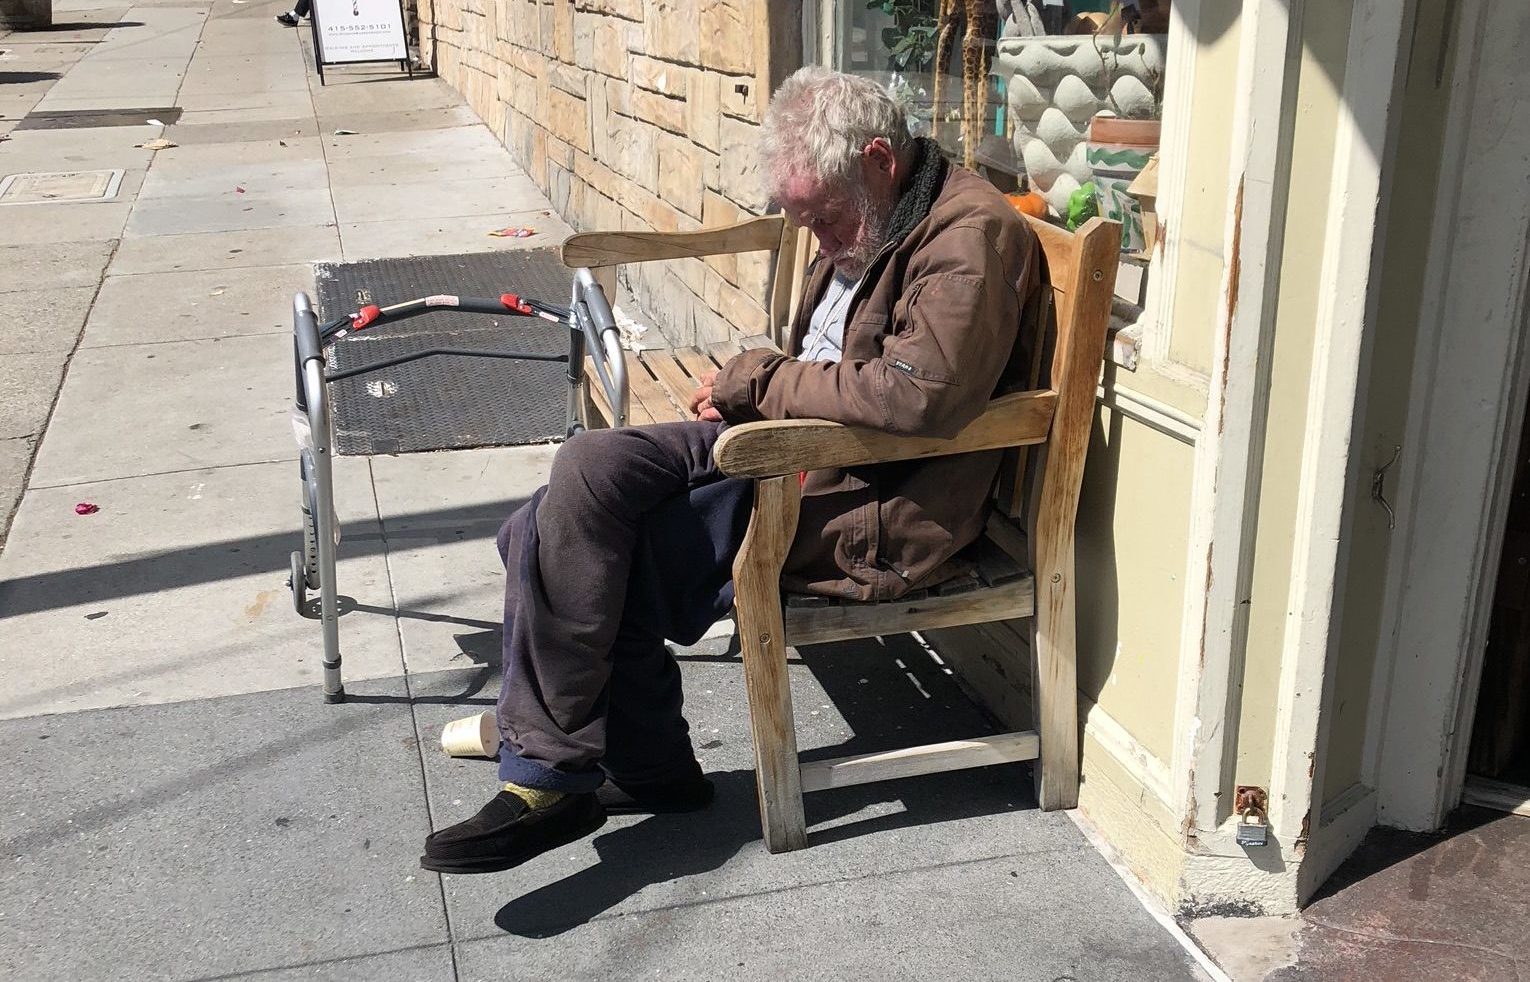 The Forgotten Old People in San Francisco